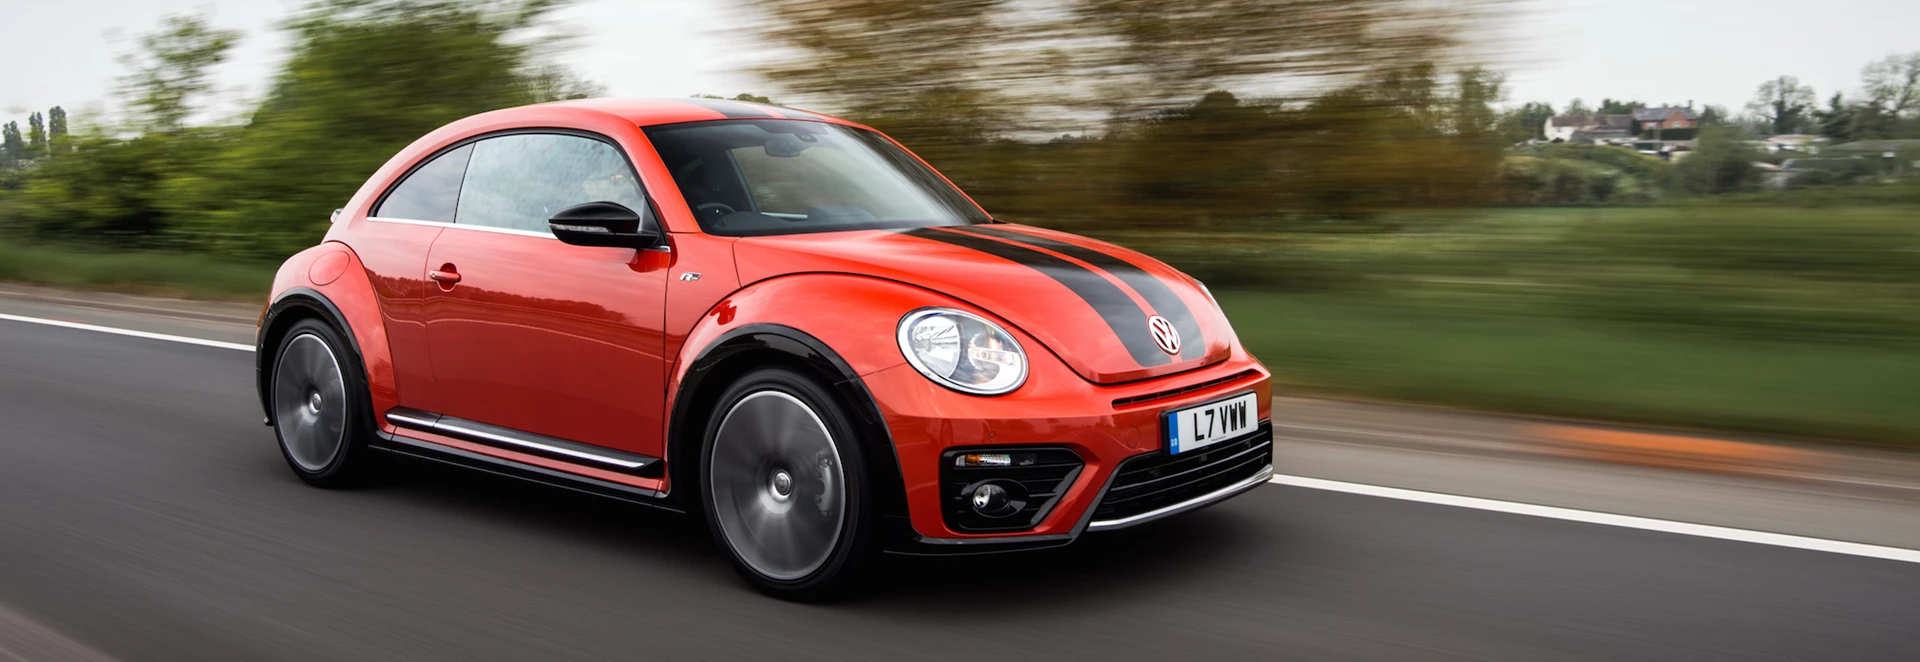 Volkswagen to end production of the Beetle